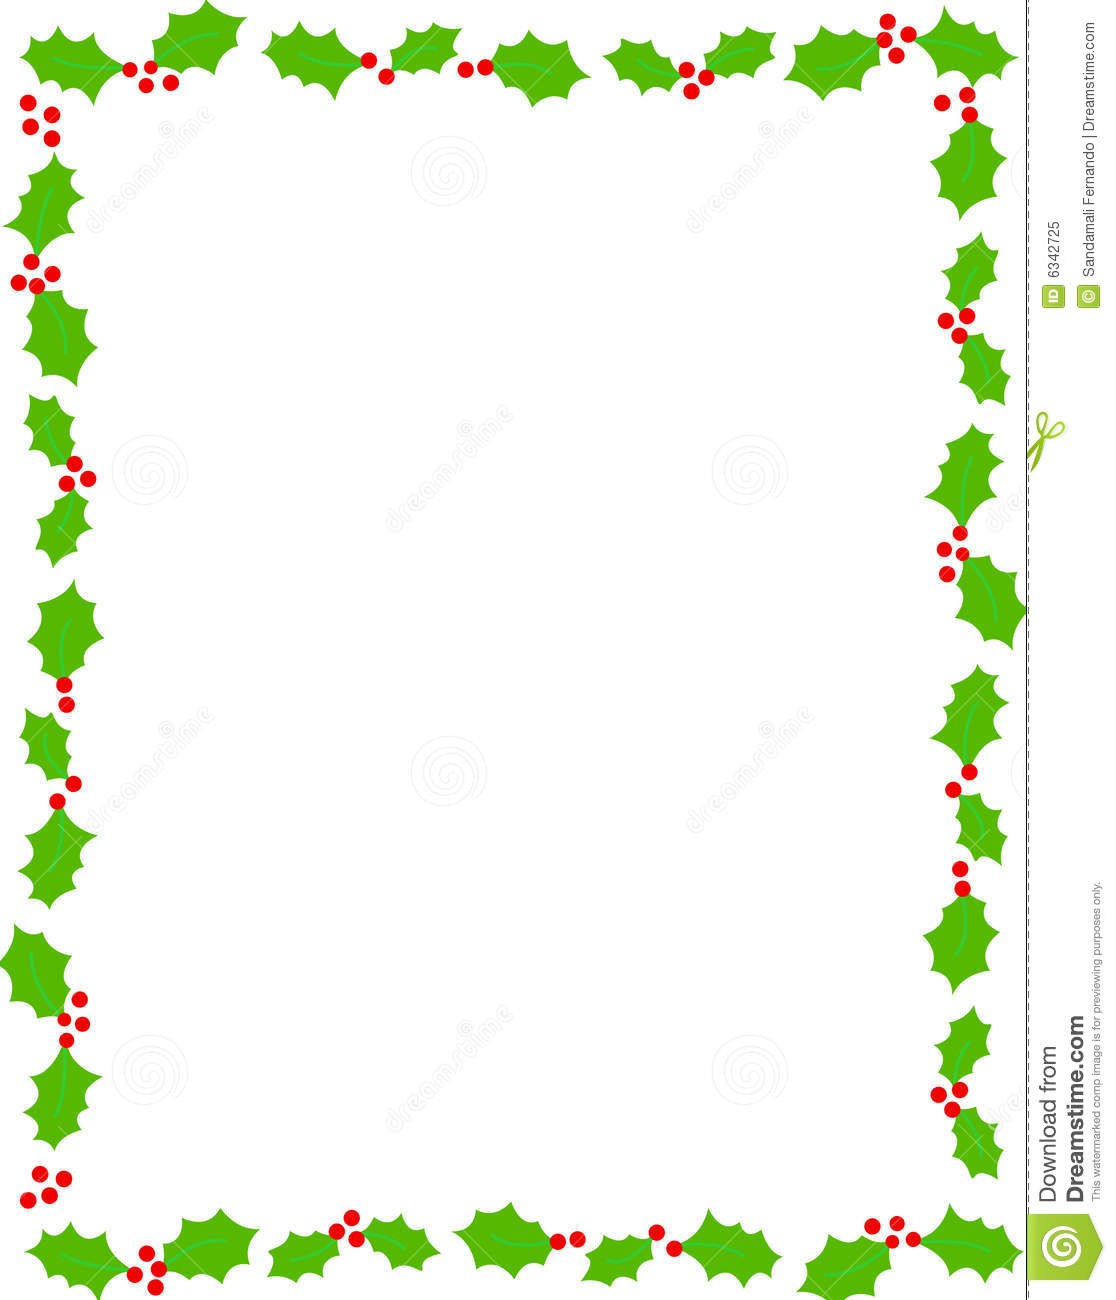 Holly Border Clipart Free & Holly Border Clip Art Images.